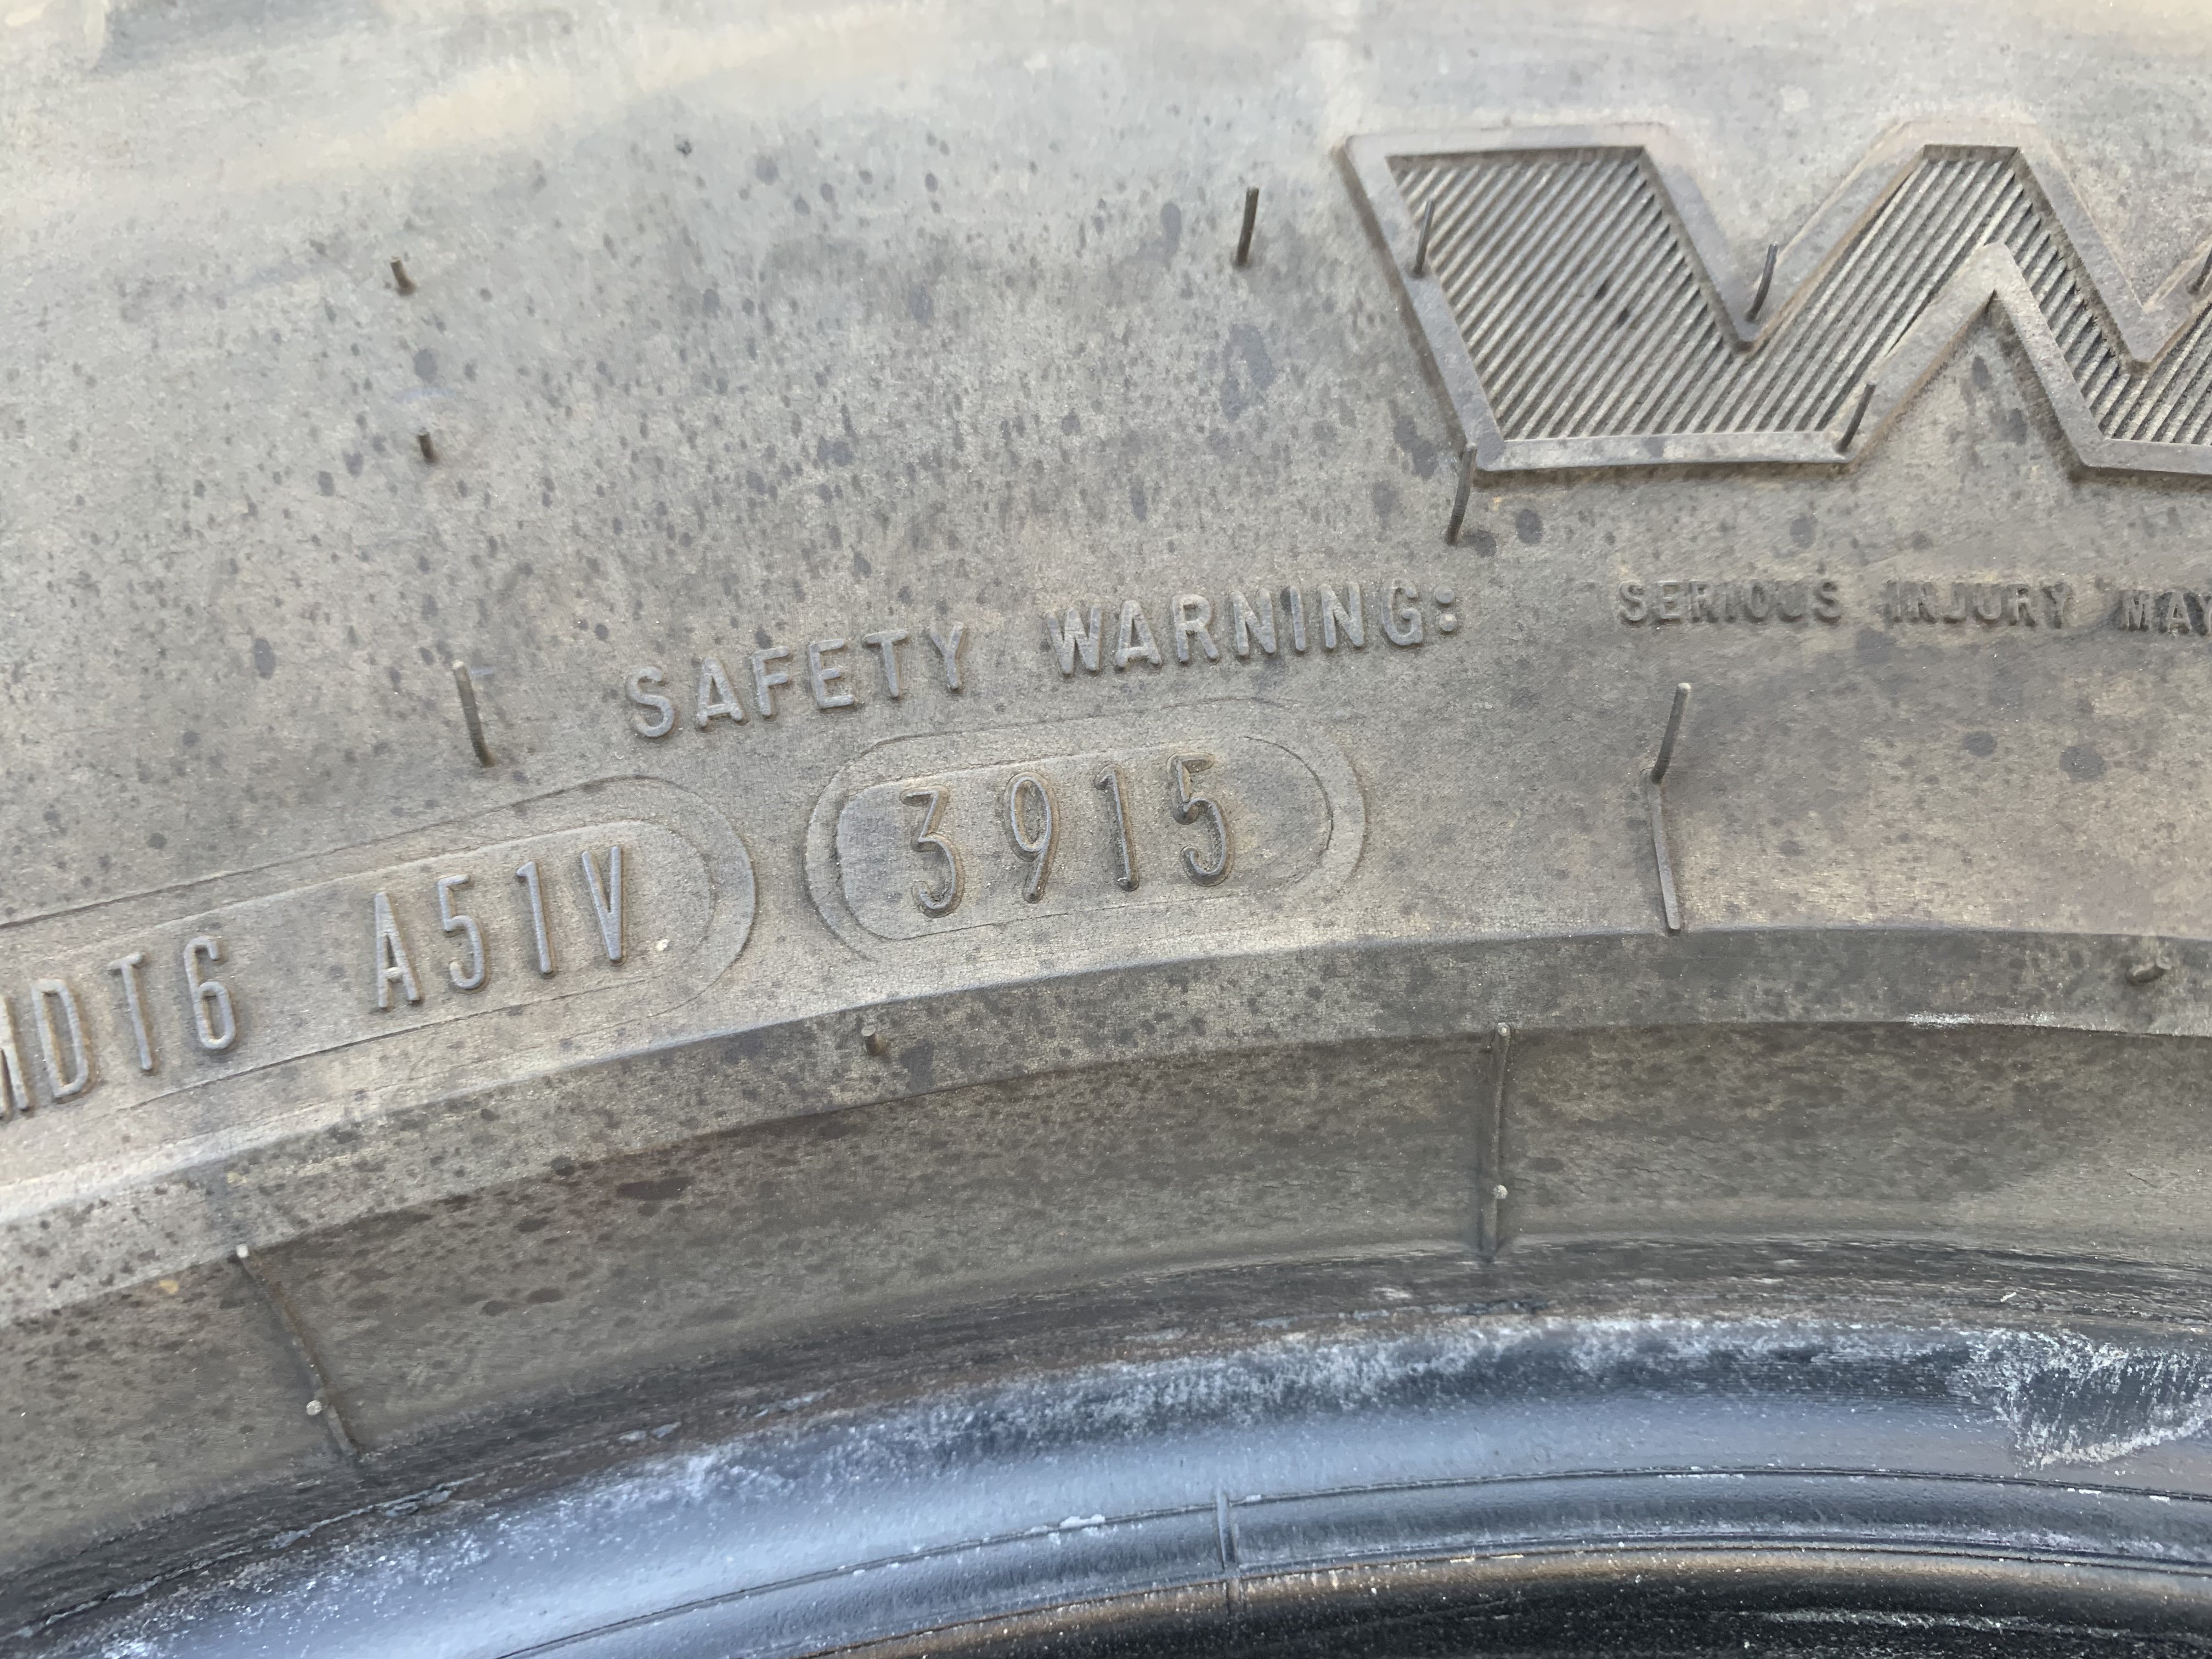 Goodyear Wrangler Duratrac load range E (Open to Trades) - Classified Ads -   Discussion forum